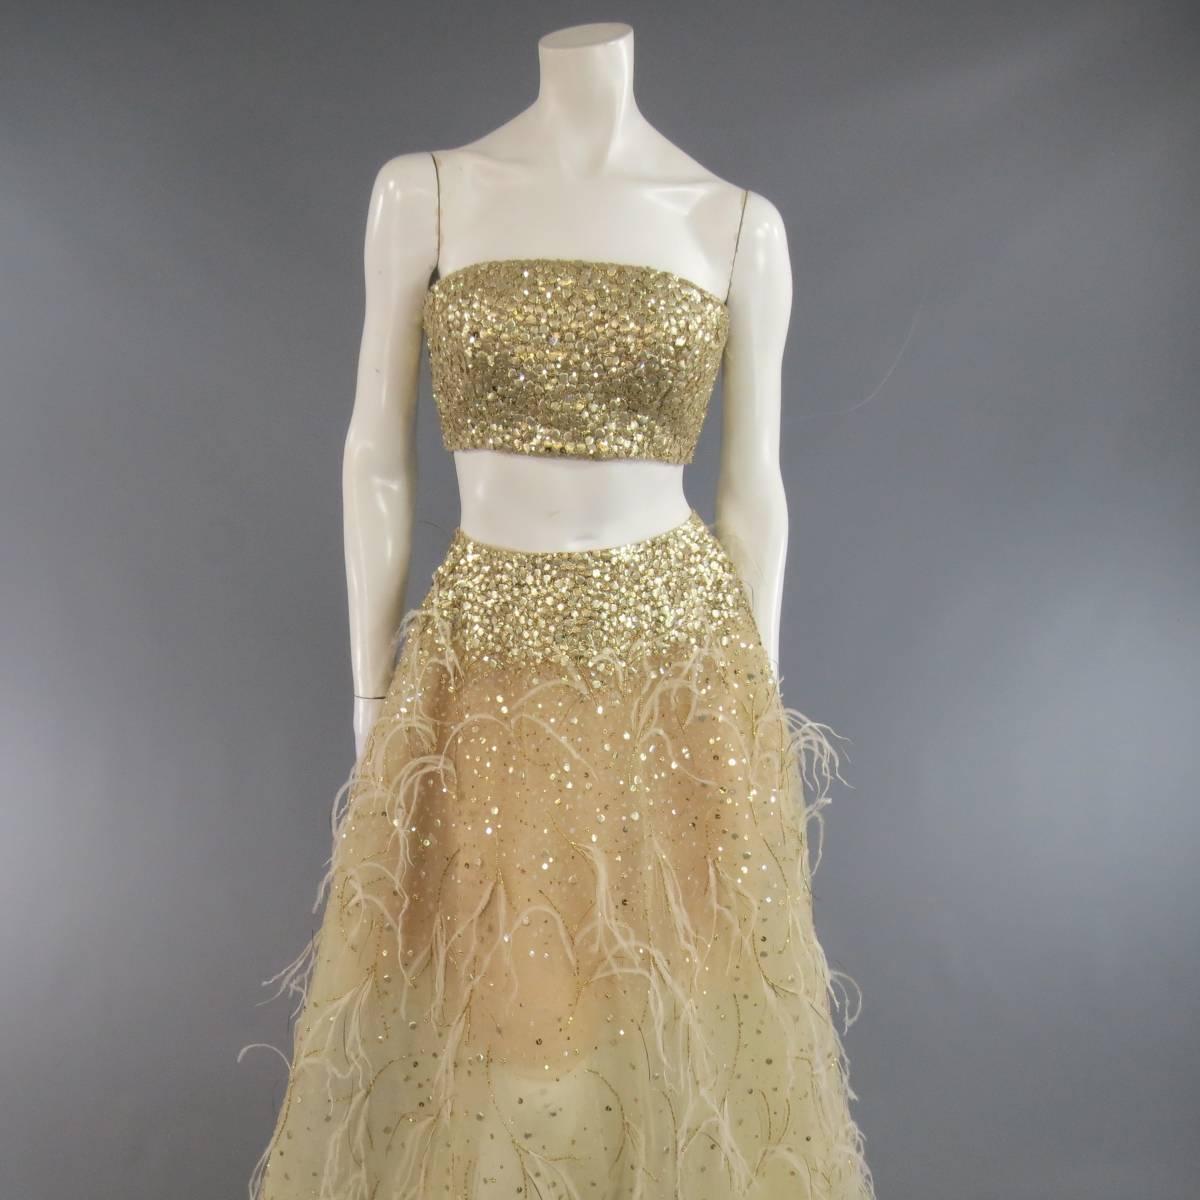 This fabulous OSCAR DE LA RENTA Spring 2015 collection evening look includes a full length gold tulle skirt embellished with clear and gold sequin, ostrich feathers, and gradient beadwork with a matching gold sequin bralet bustier. Made in the